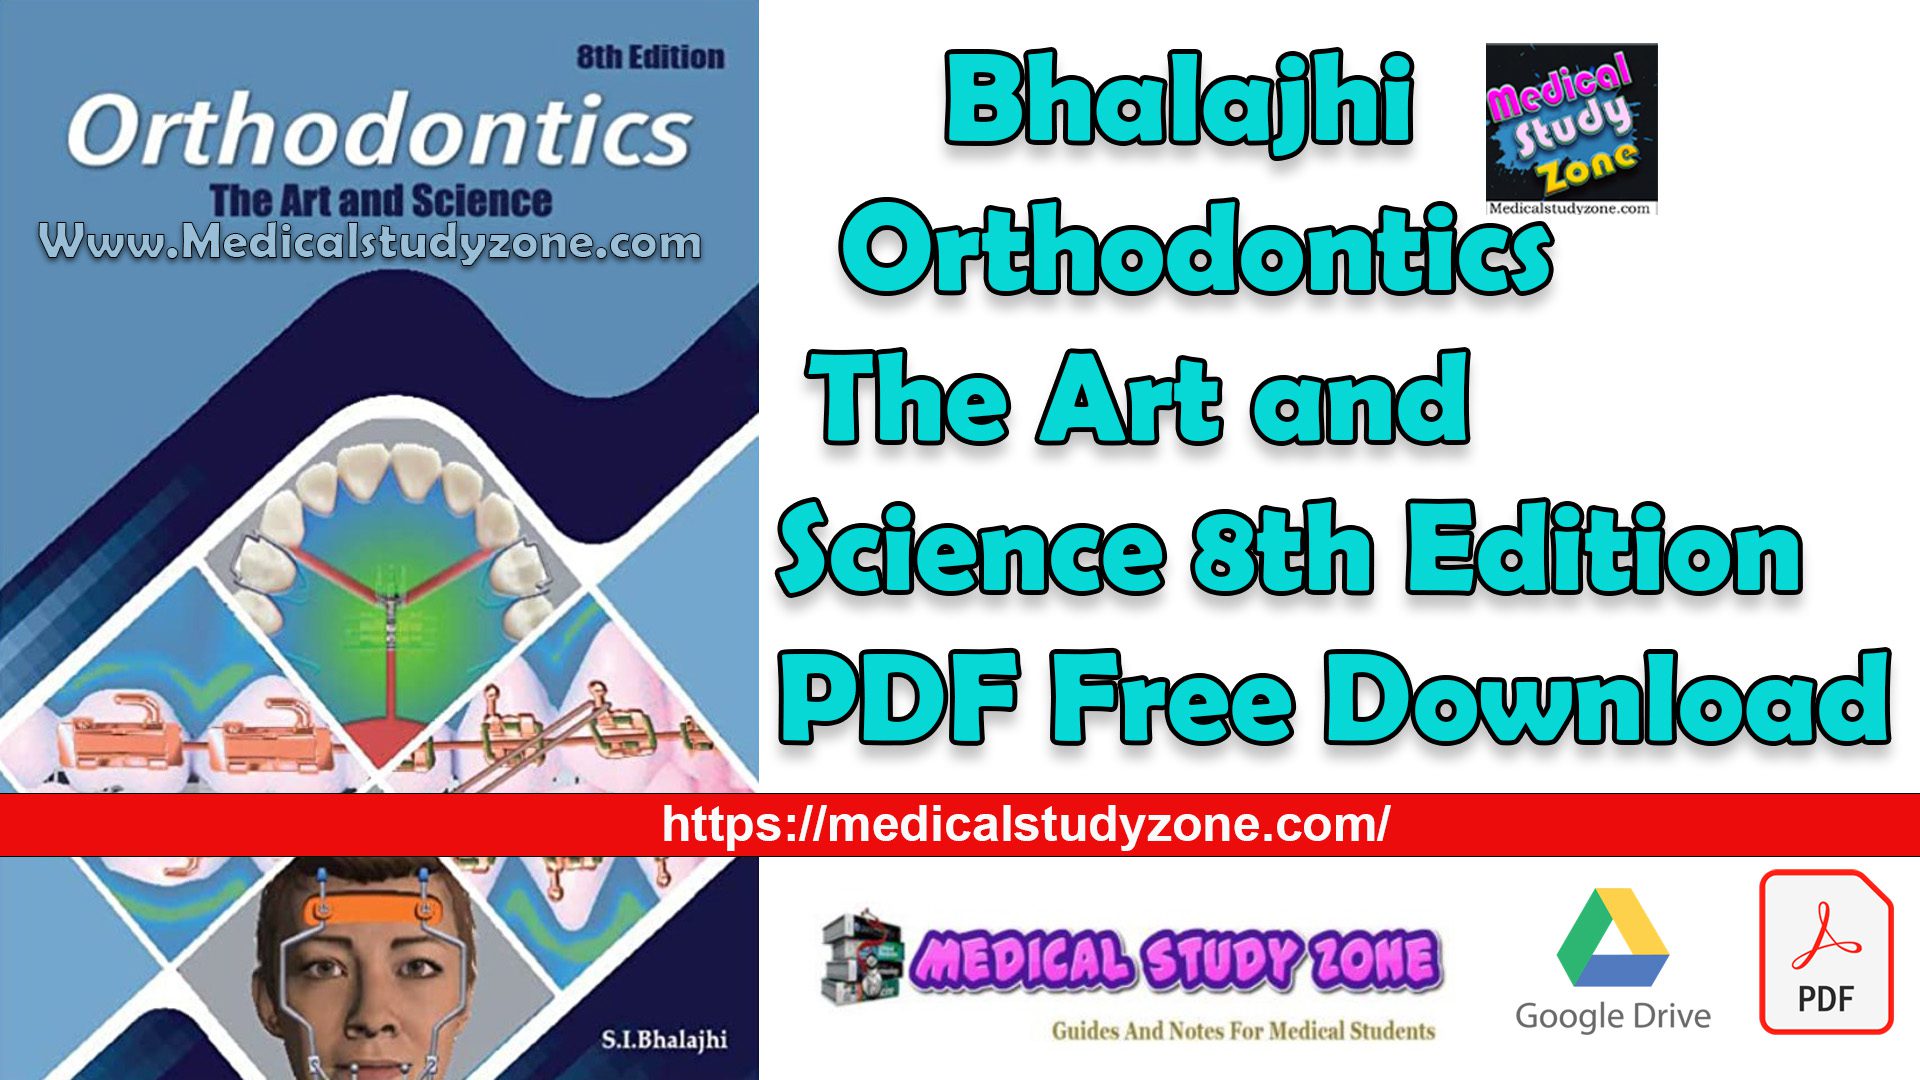 Bhalajhi Orthodontics The Art and Science 8th Edition PDF Free Download